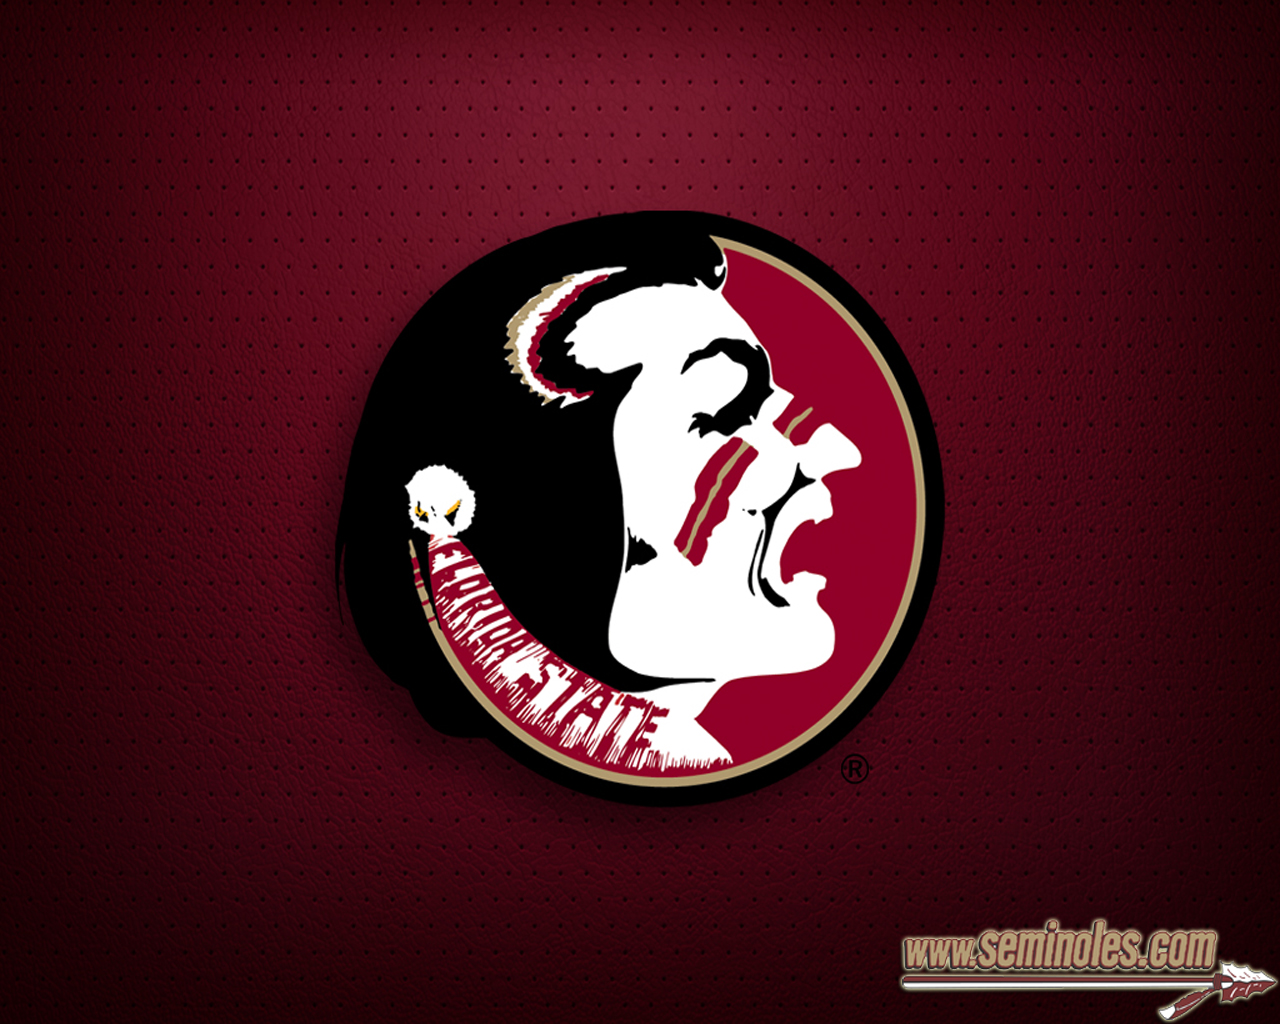 abstrack florida state seminoles football 775314 With Resolutions 1280